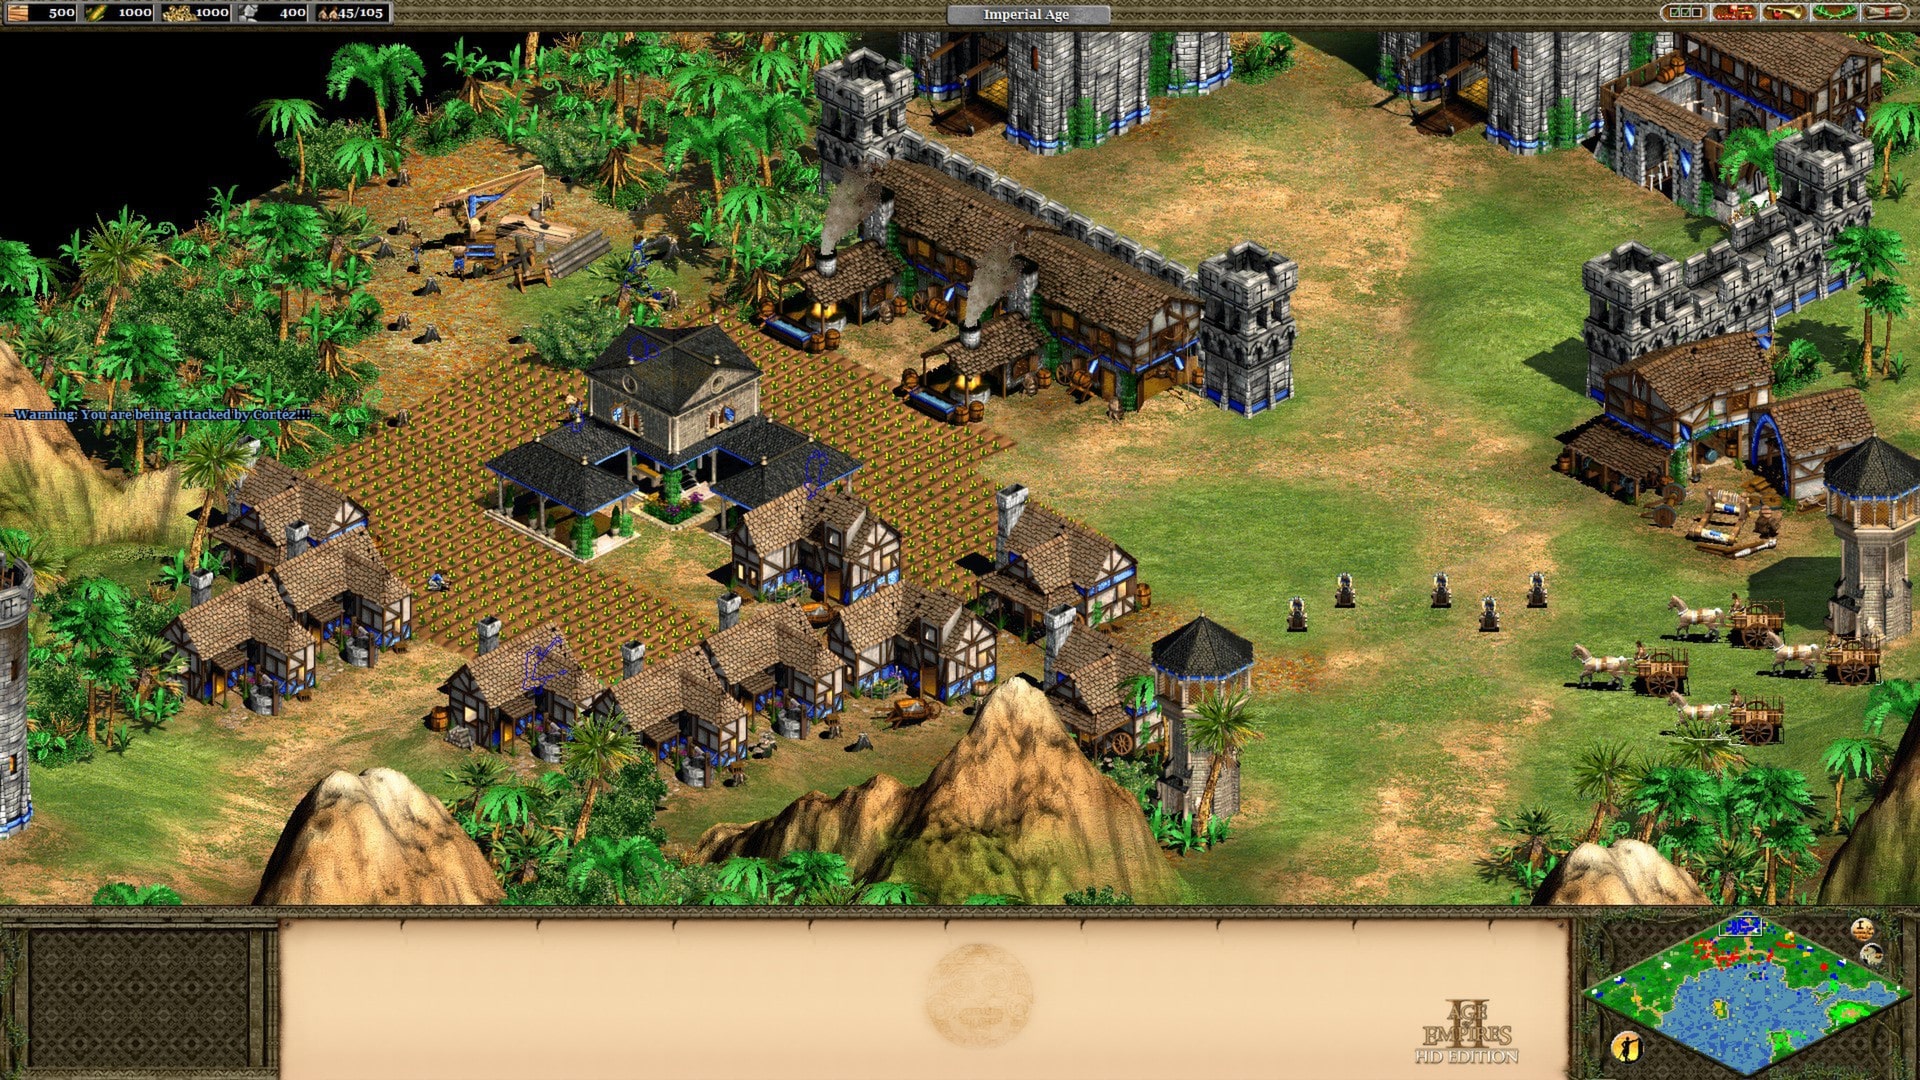 Age of empires 2 download full version for windows 10 free